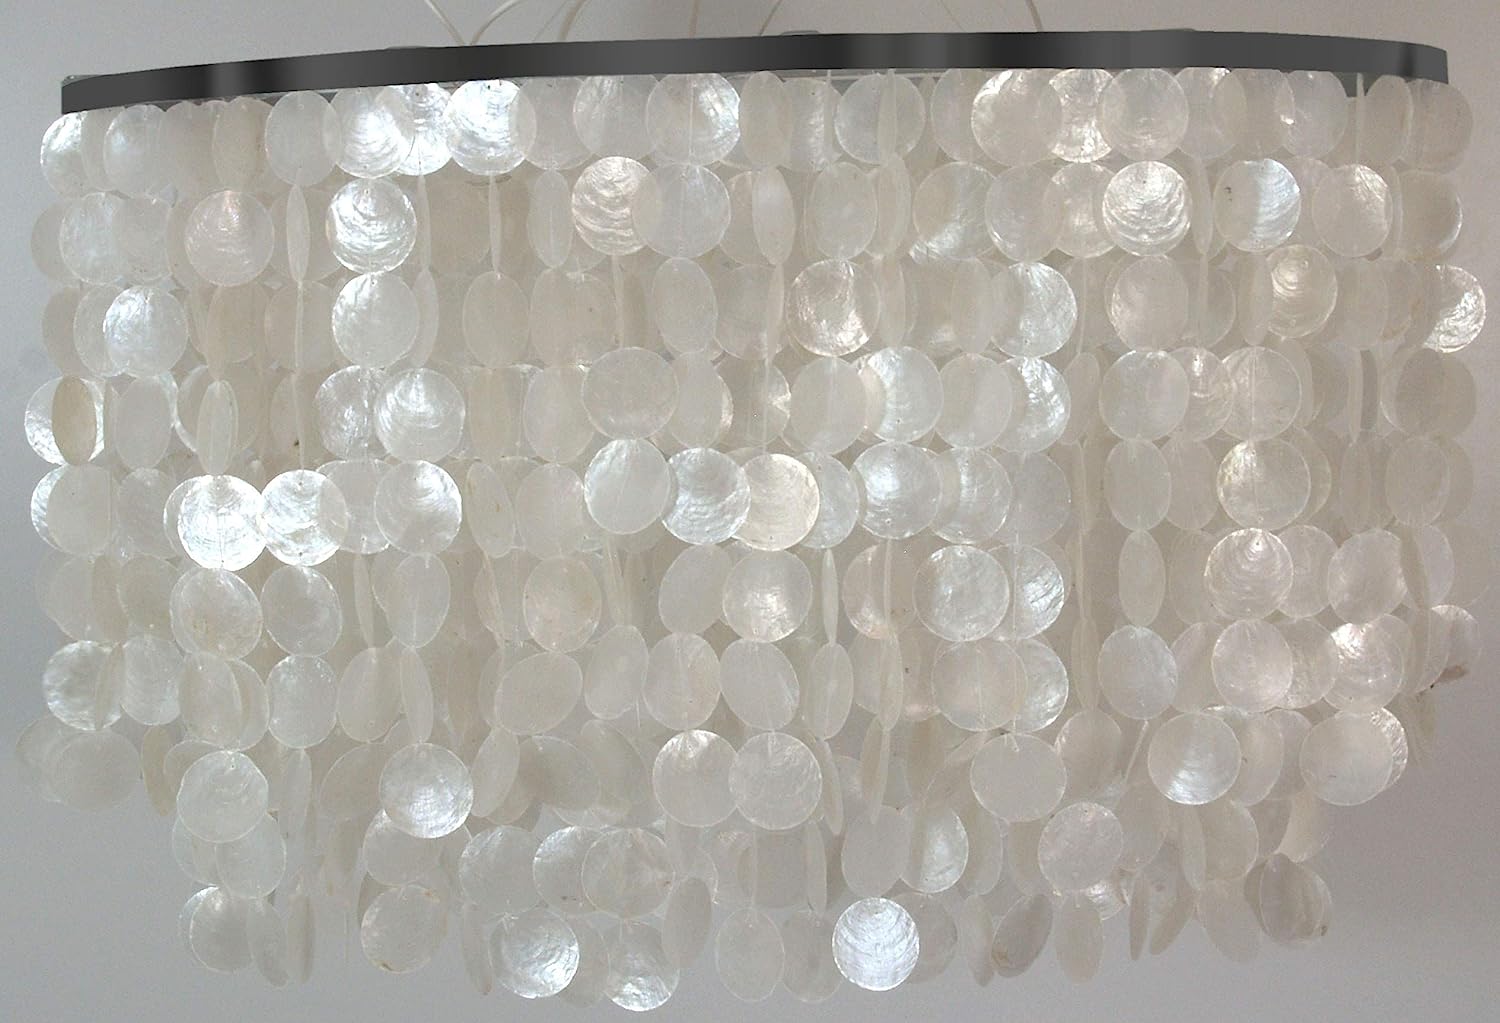 GURU SHOP Ceiling Light, Shell Light from Hundreds of Capiz, Mother of Pearl Platelets - Colima Model, Shell Discs, 50 x 75 x 40 cm, Pendant Lights Made from Natural Materials